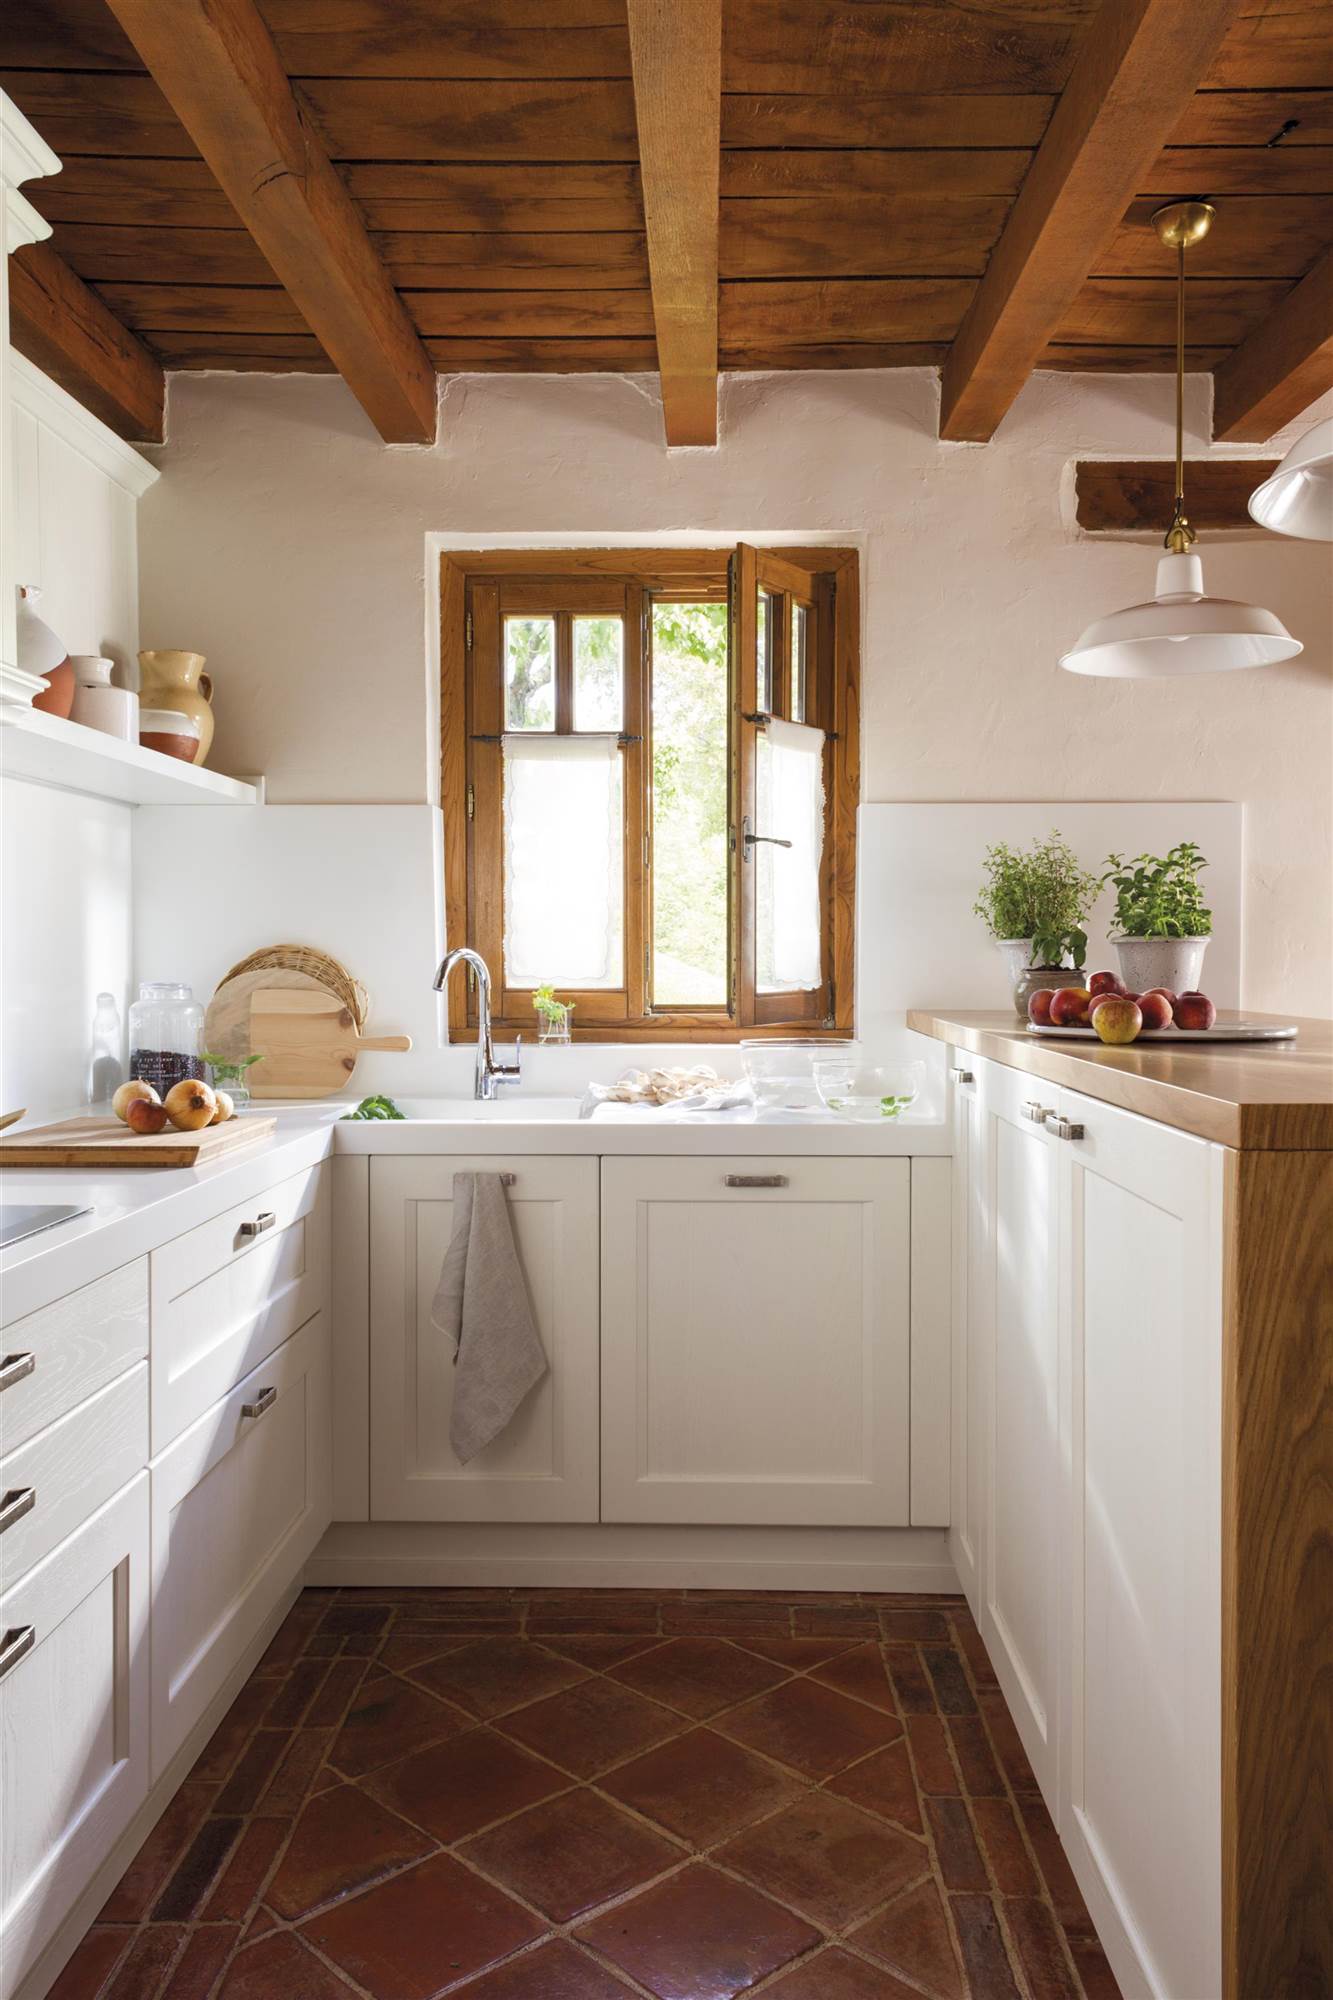 Small white kitchen are mud floors and a wooden ceiling with beams. 